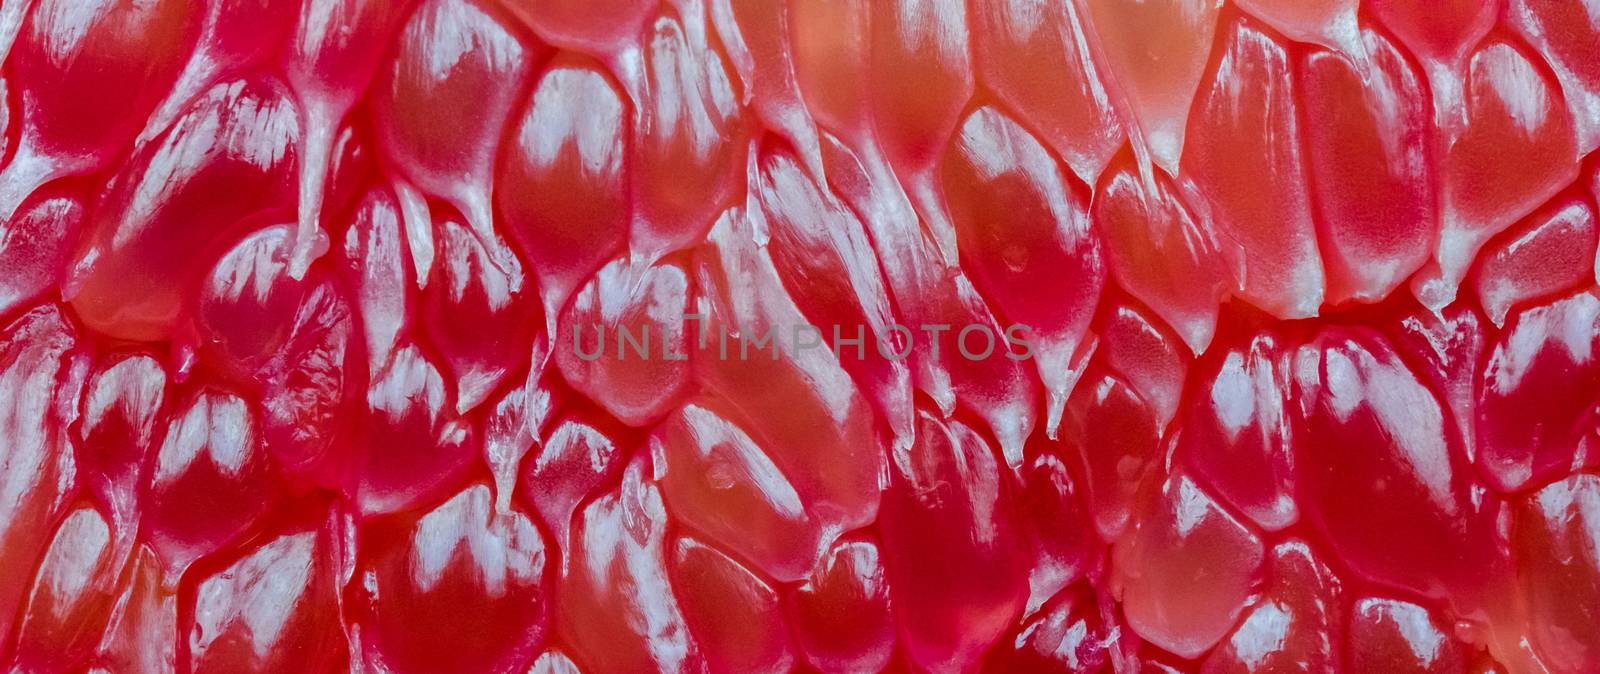 Macro shot of red pomelo pulp texture background. Thailand Siam ruby pomelo fruit. Natural source of vitamin C (antioxidants) and potassium. Healthy food for slow down aging by Fahroni